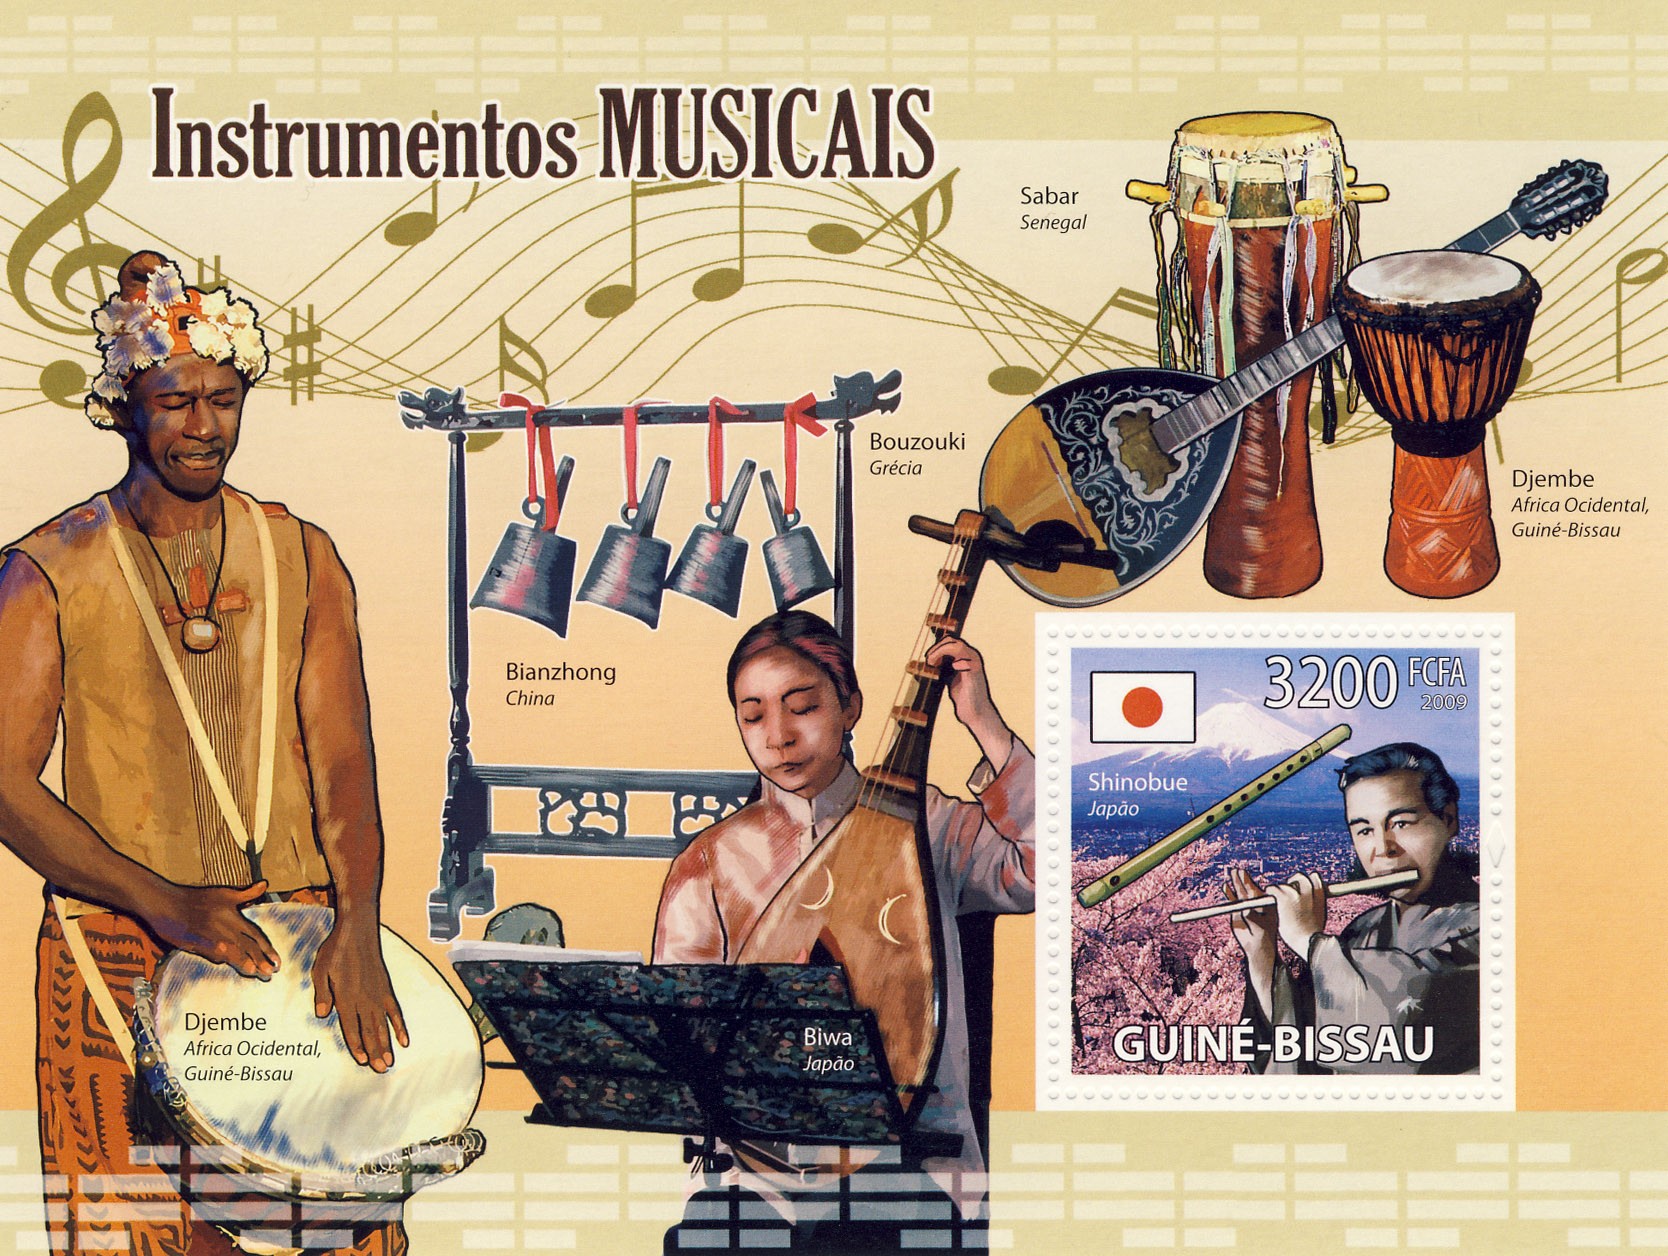 Musical instruments - Issue of Guinée-Bissau postage stamps